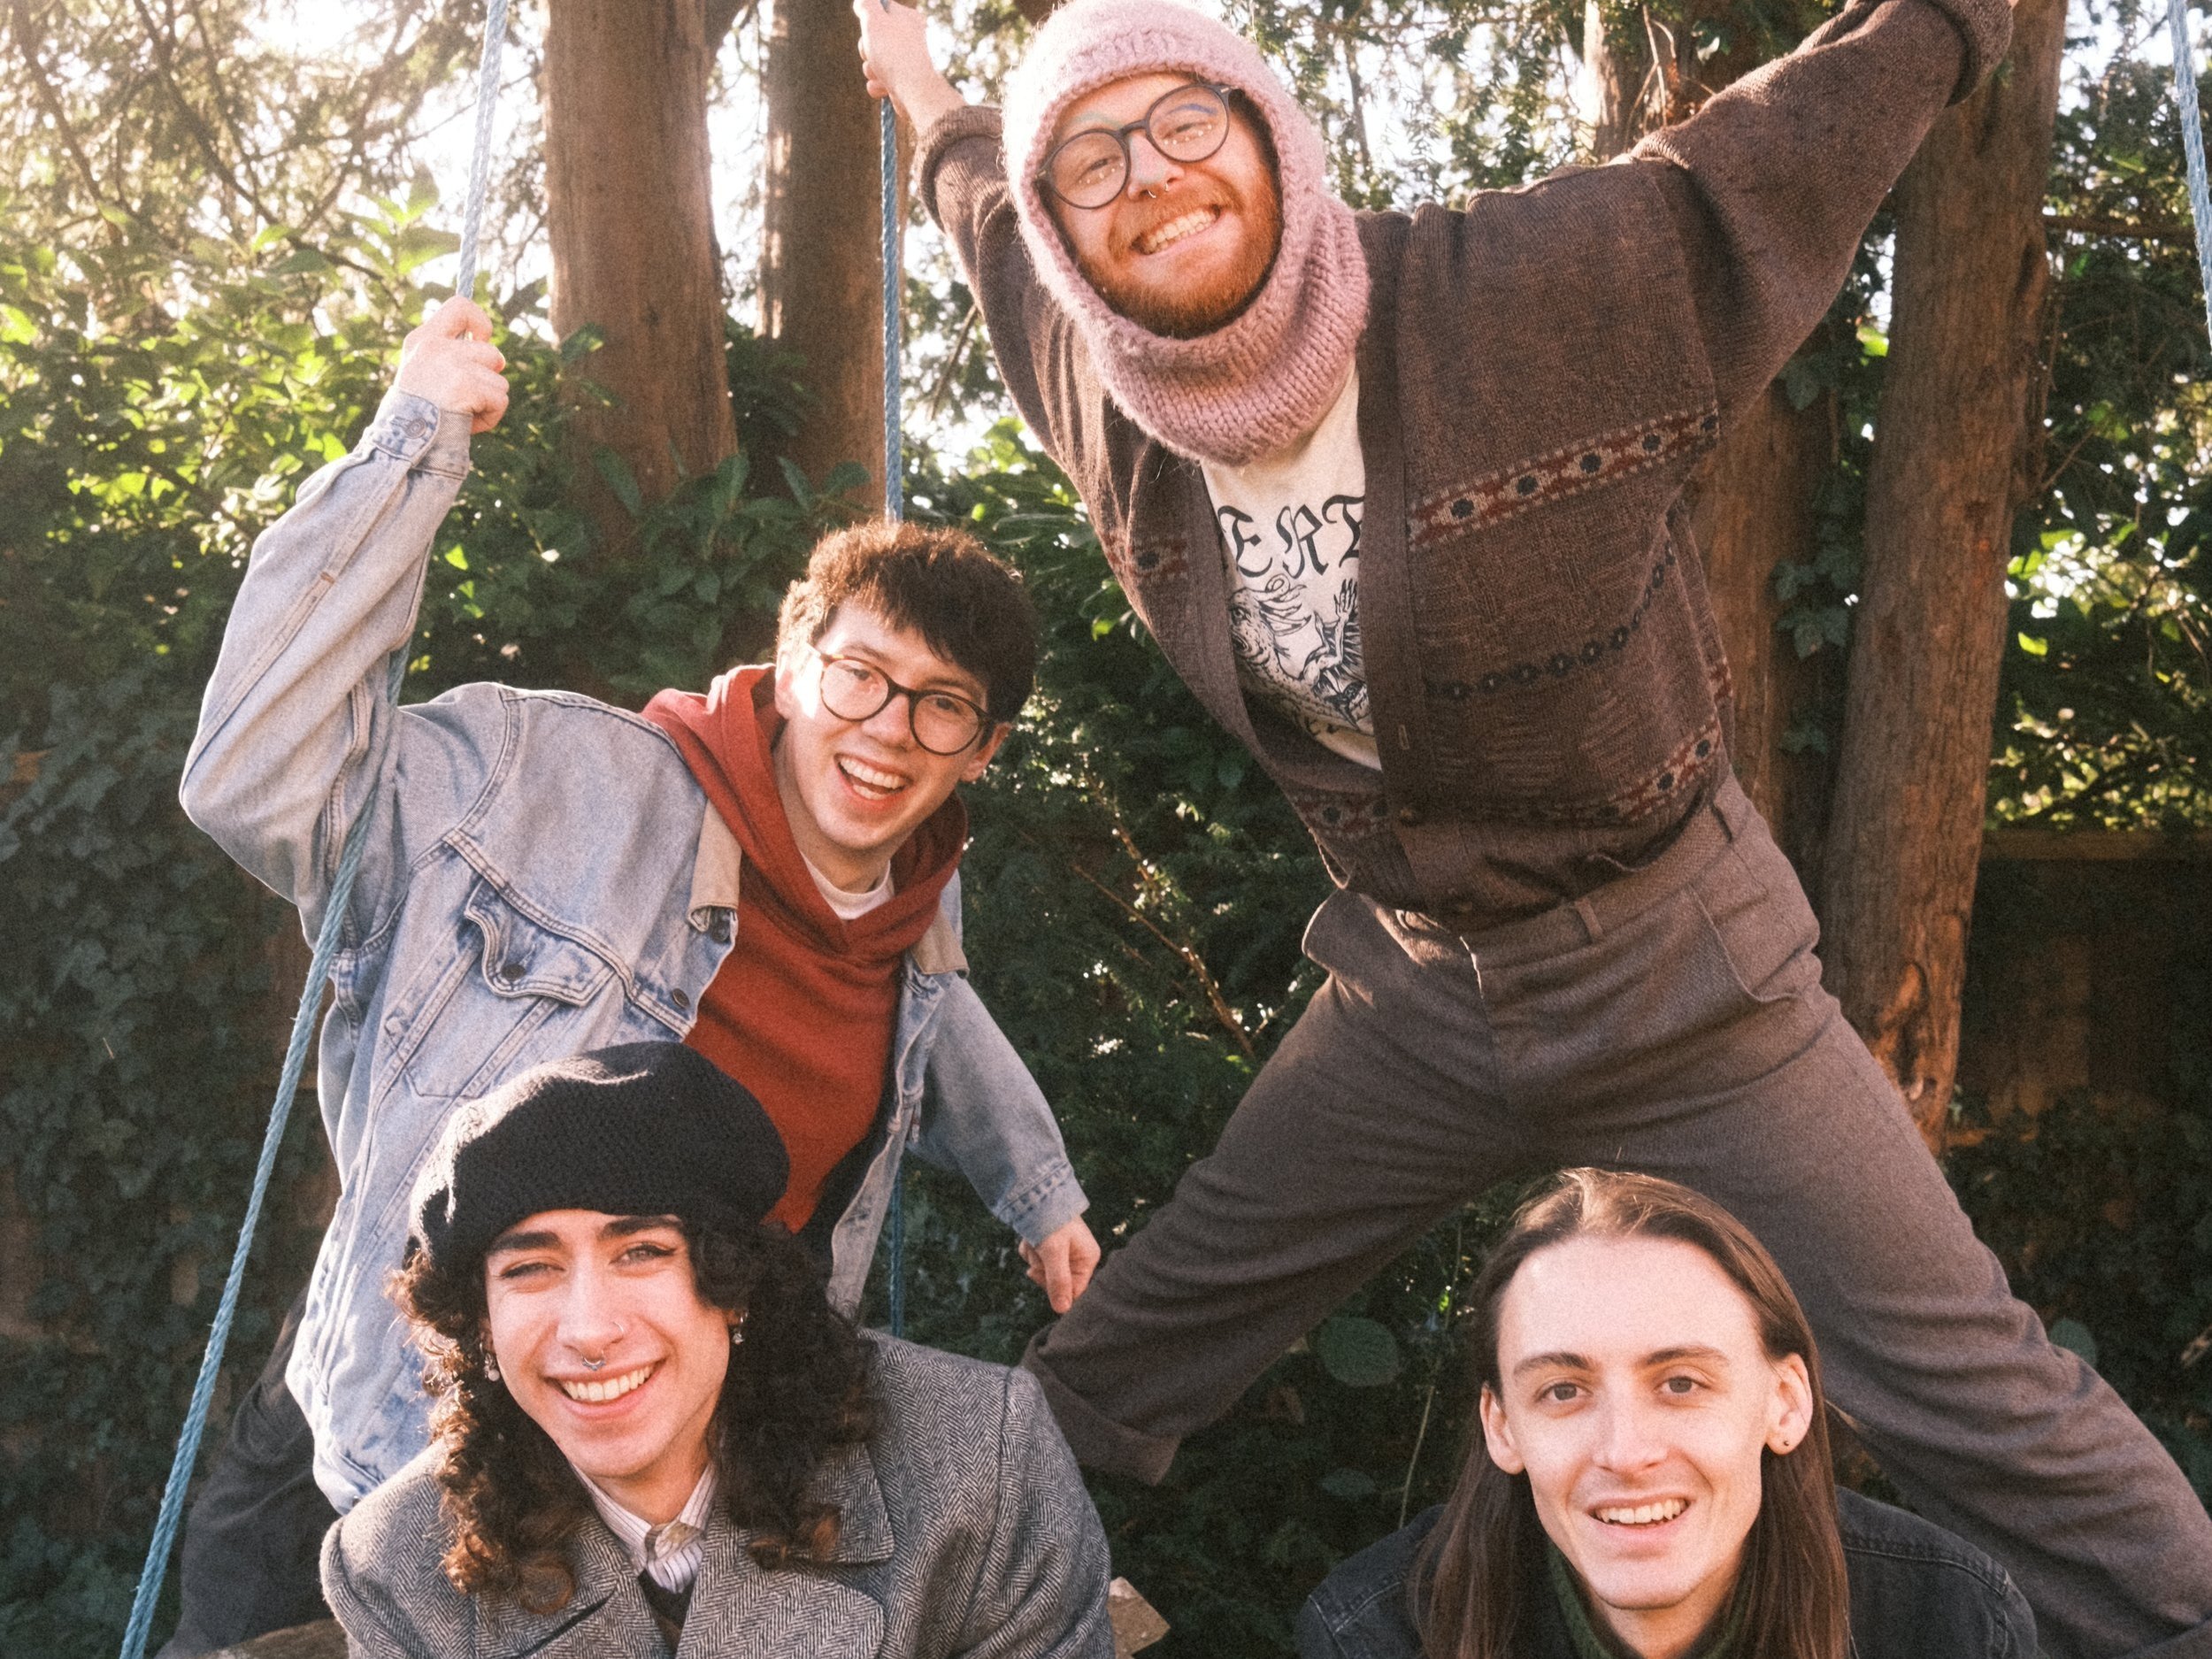 Interview: Bears in Trees - From Introspection to Inspiration